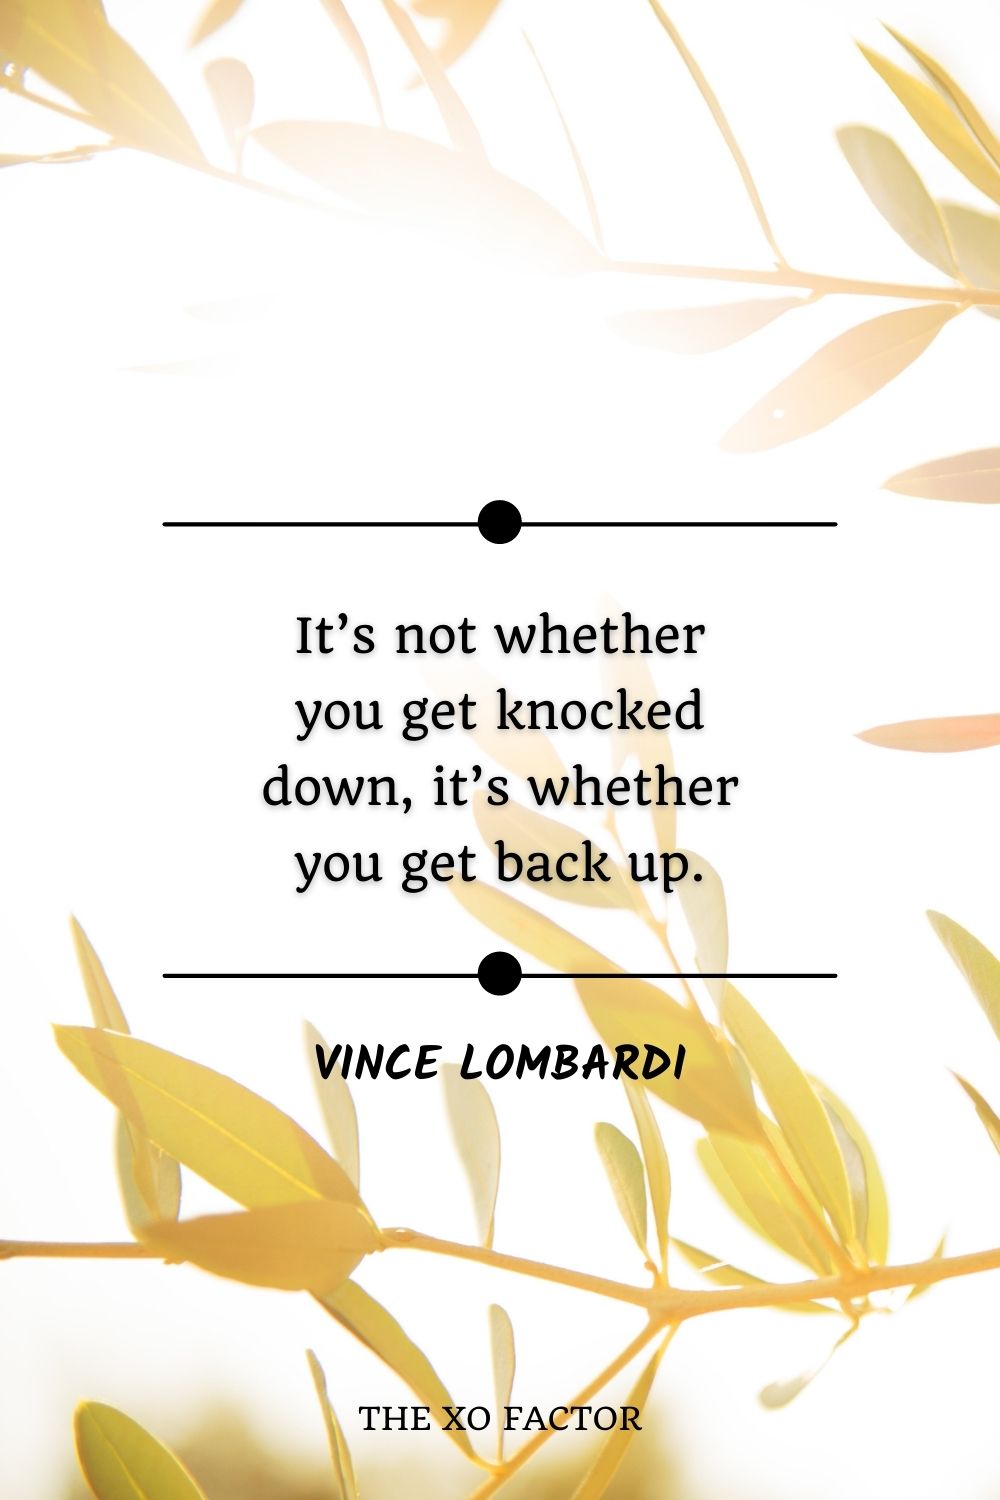 It’s not whether you get knocked down, it’s whether you get back up.” –Vince Lombardi